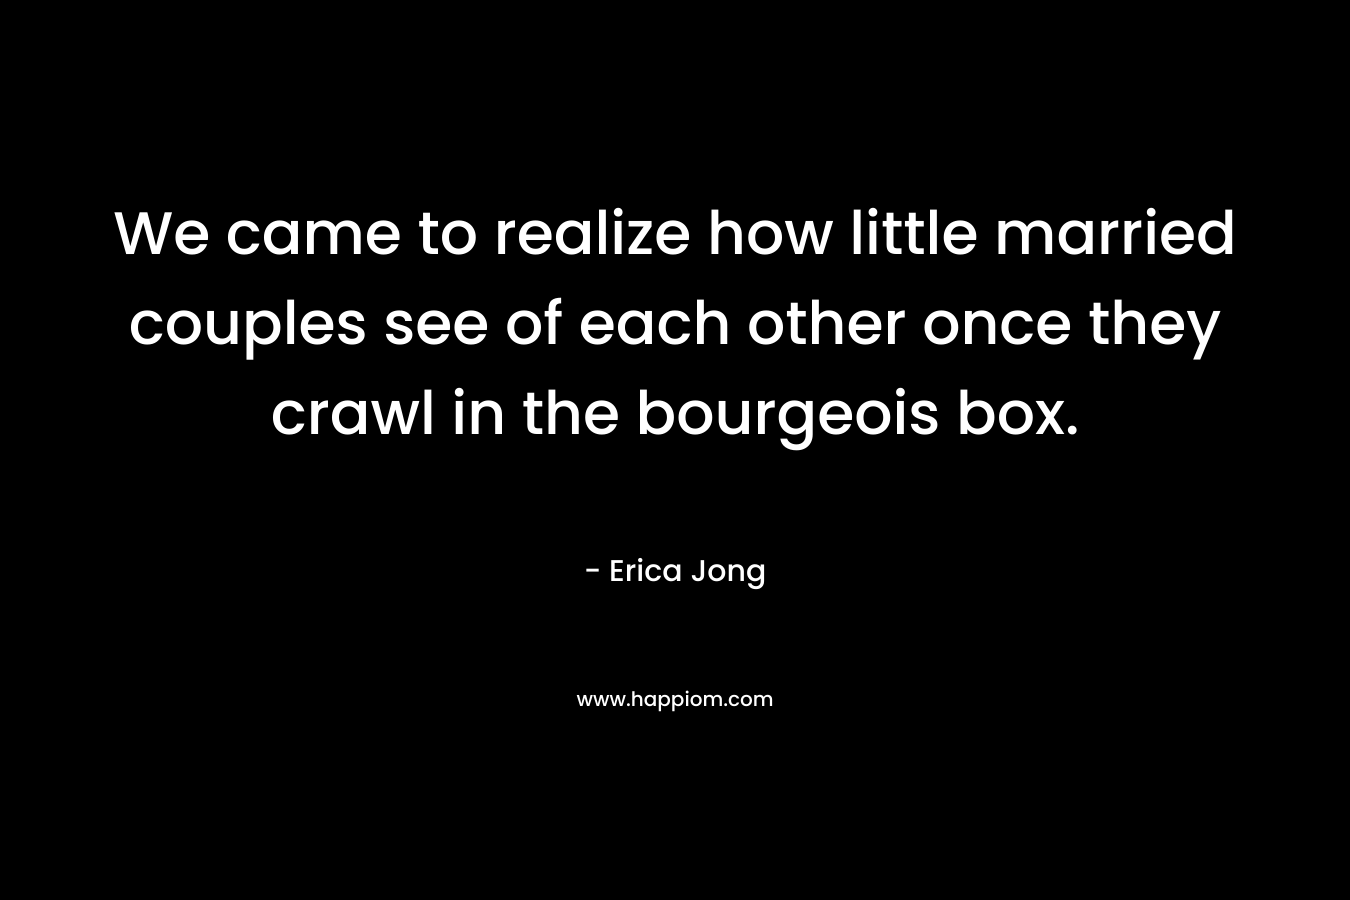 We came to realize how little married couples see of each other once they crawl in the bourgeois box.